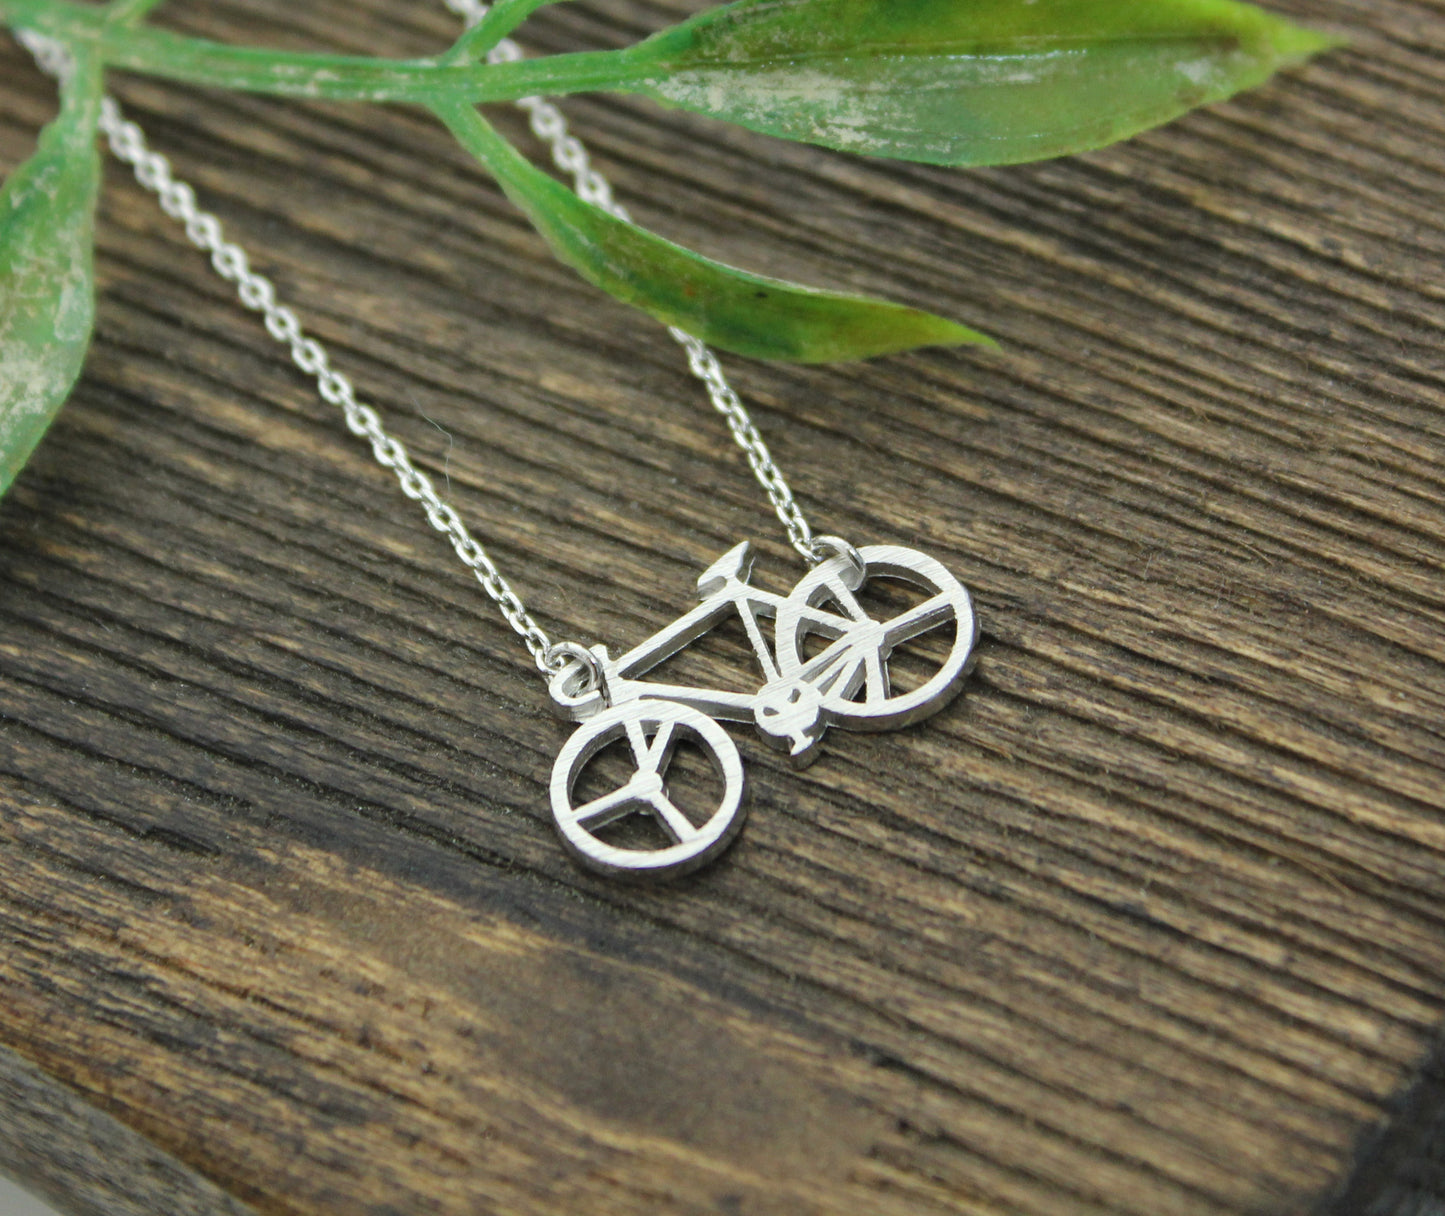 Bicycle necklace, Bike necklace pendant Necklace in silver color